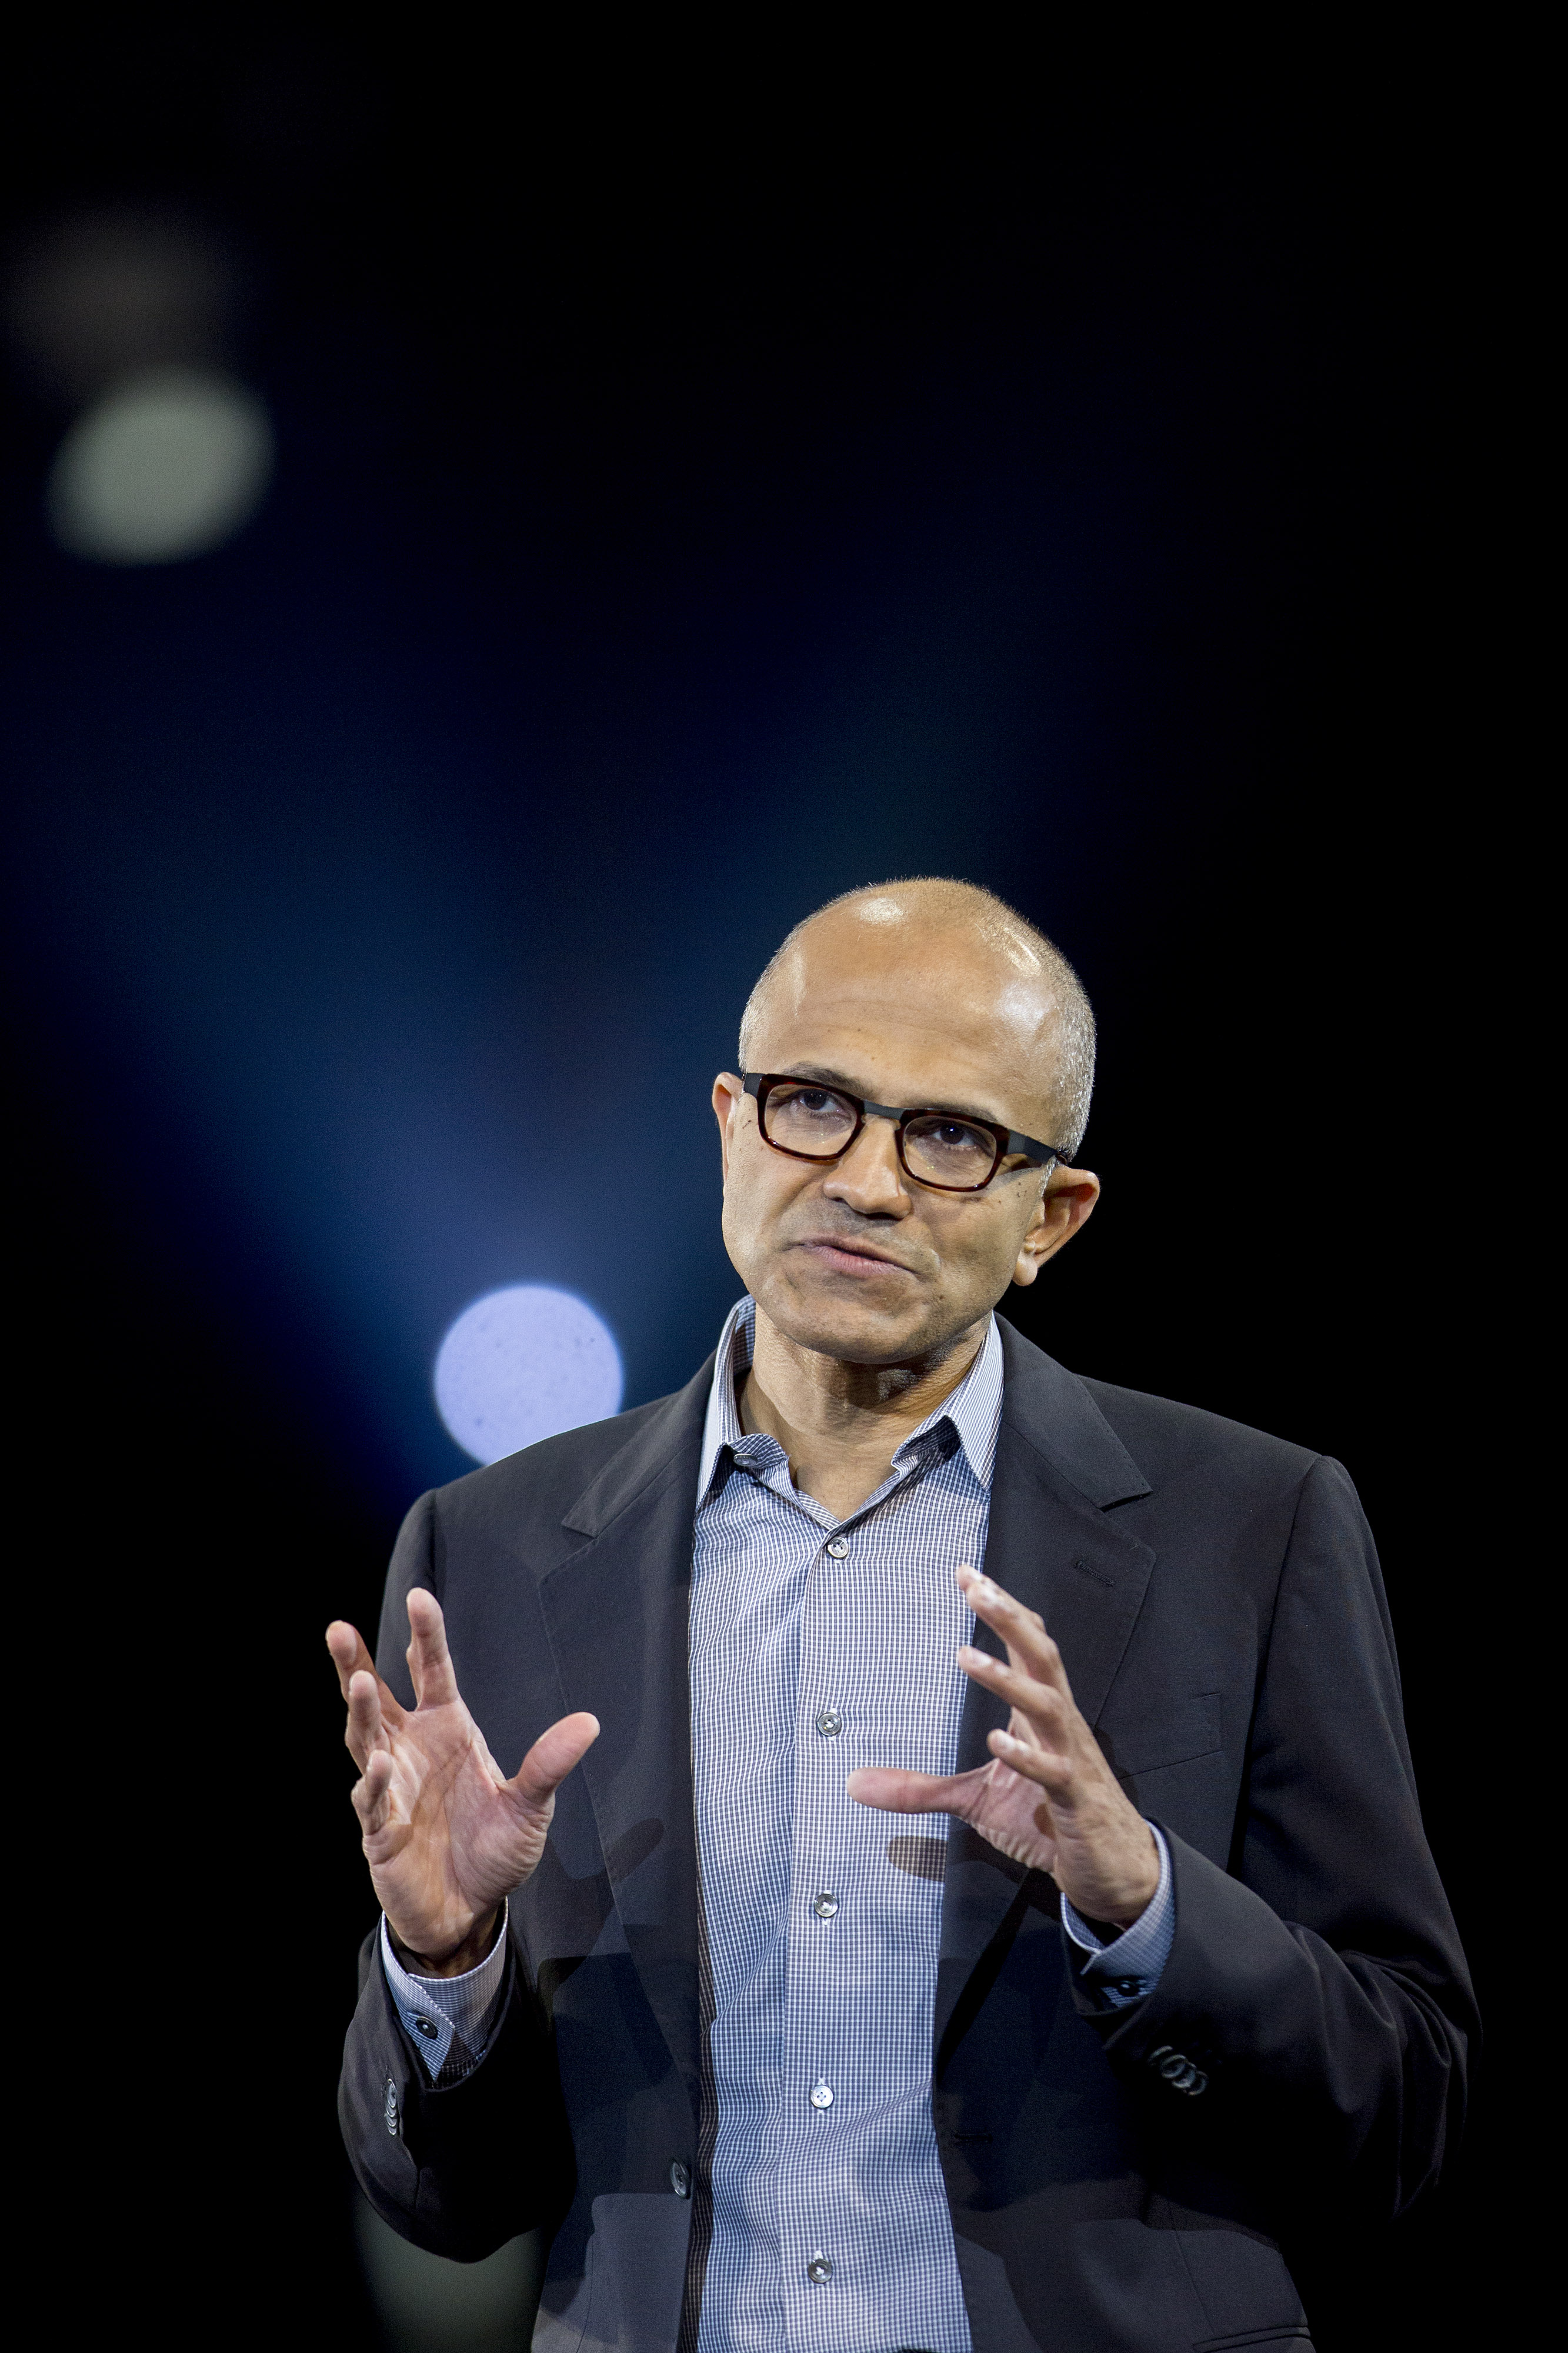 Satya Nadella, chief executive officer of Microsoft Corp., speaks during a keynote session at the Microsoft Worldwide Partner Conference in Washington on July 16, 2014. (Bloomberg/Getty Images)